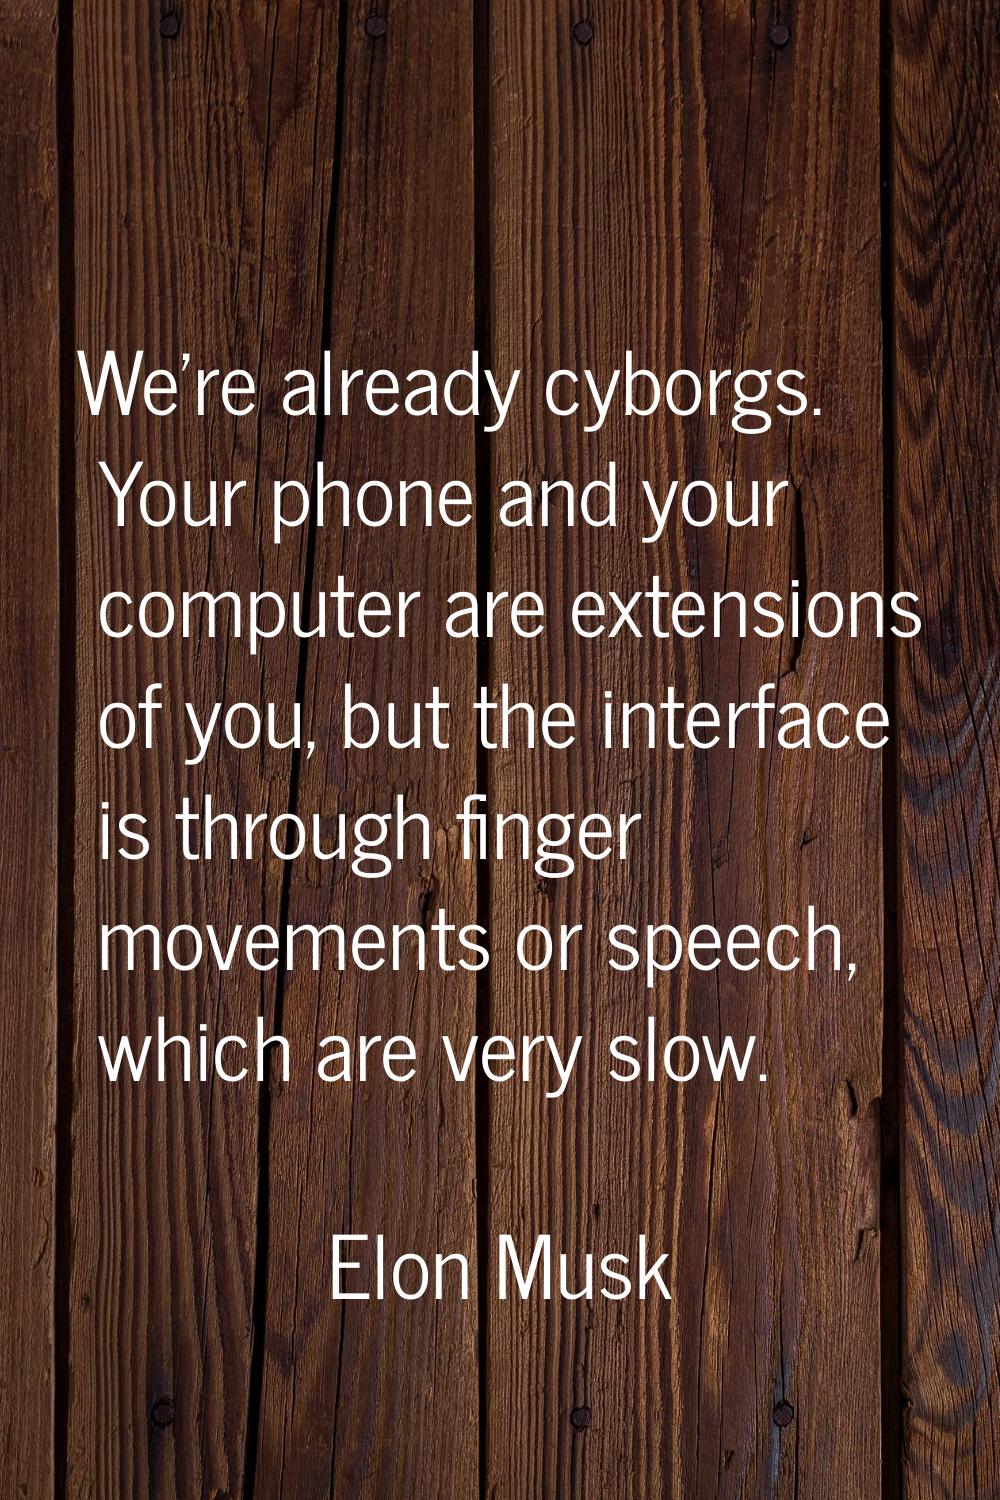 We're already cyborgs. Your phone and your computer are extensions of you, but the interface is thr